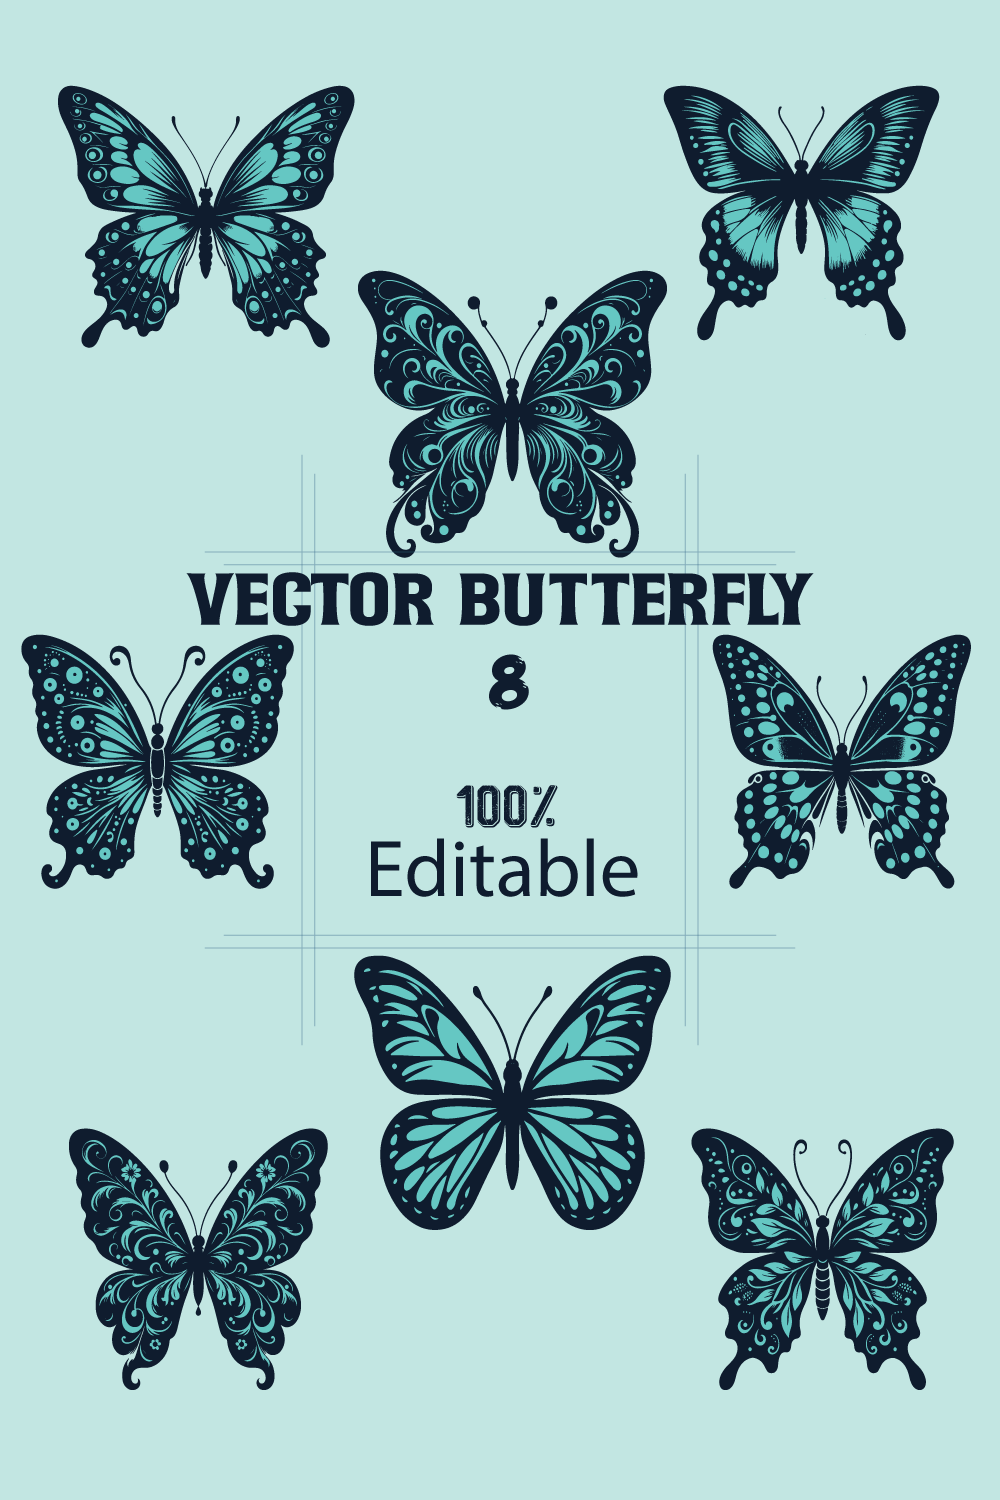 Butterfly vector artwork pinterest preview image.